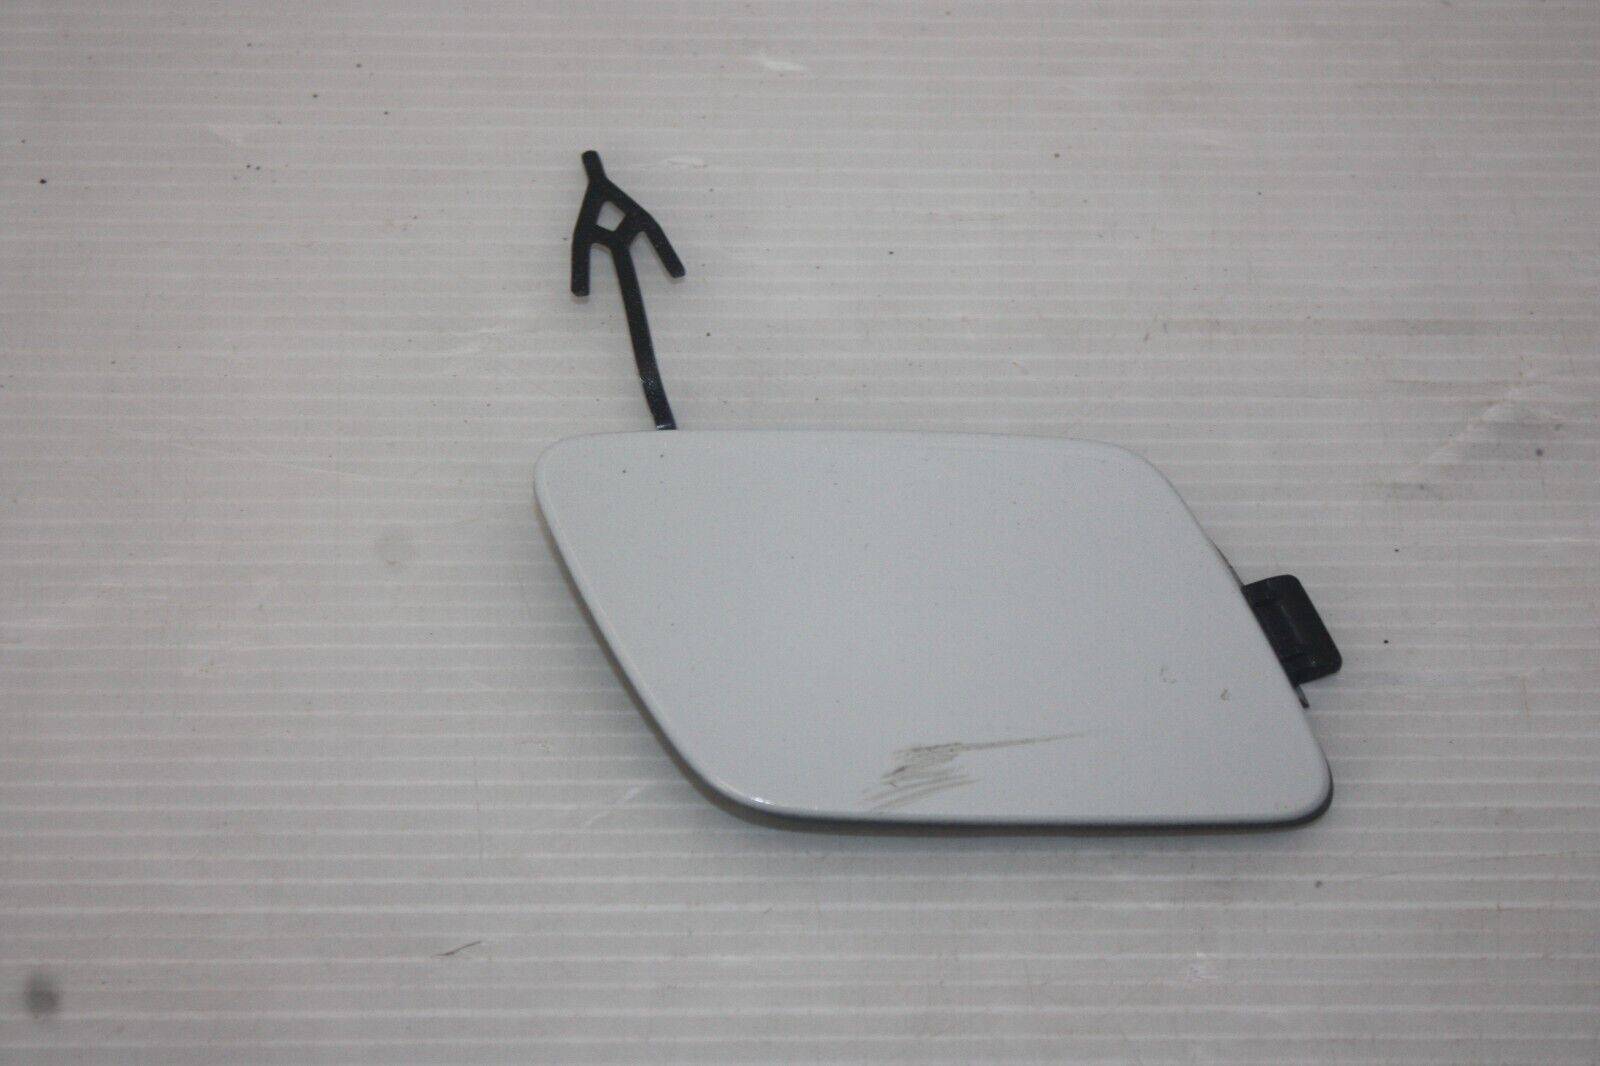 Audi A6 C8 S Line Front Bumper Tow Cover 4K0807241A Genuine NEED RESPRAY 175910442132